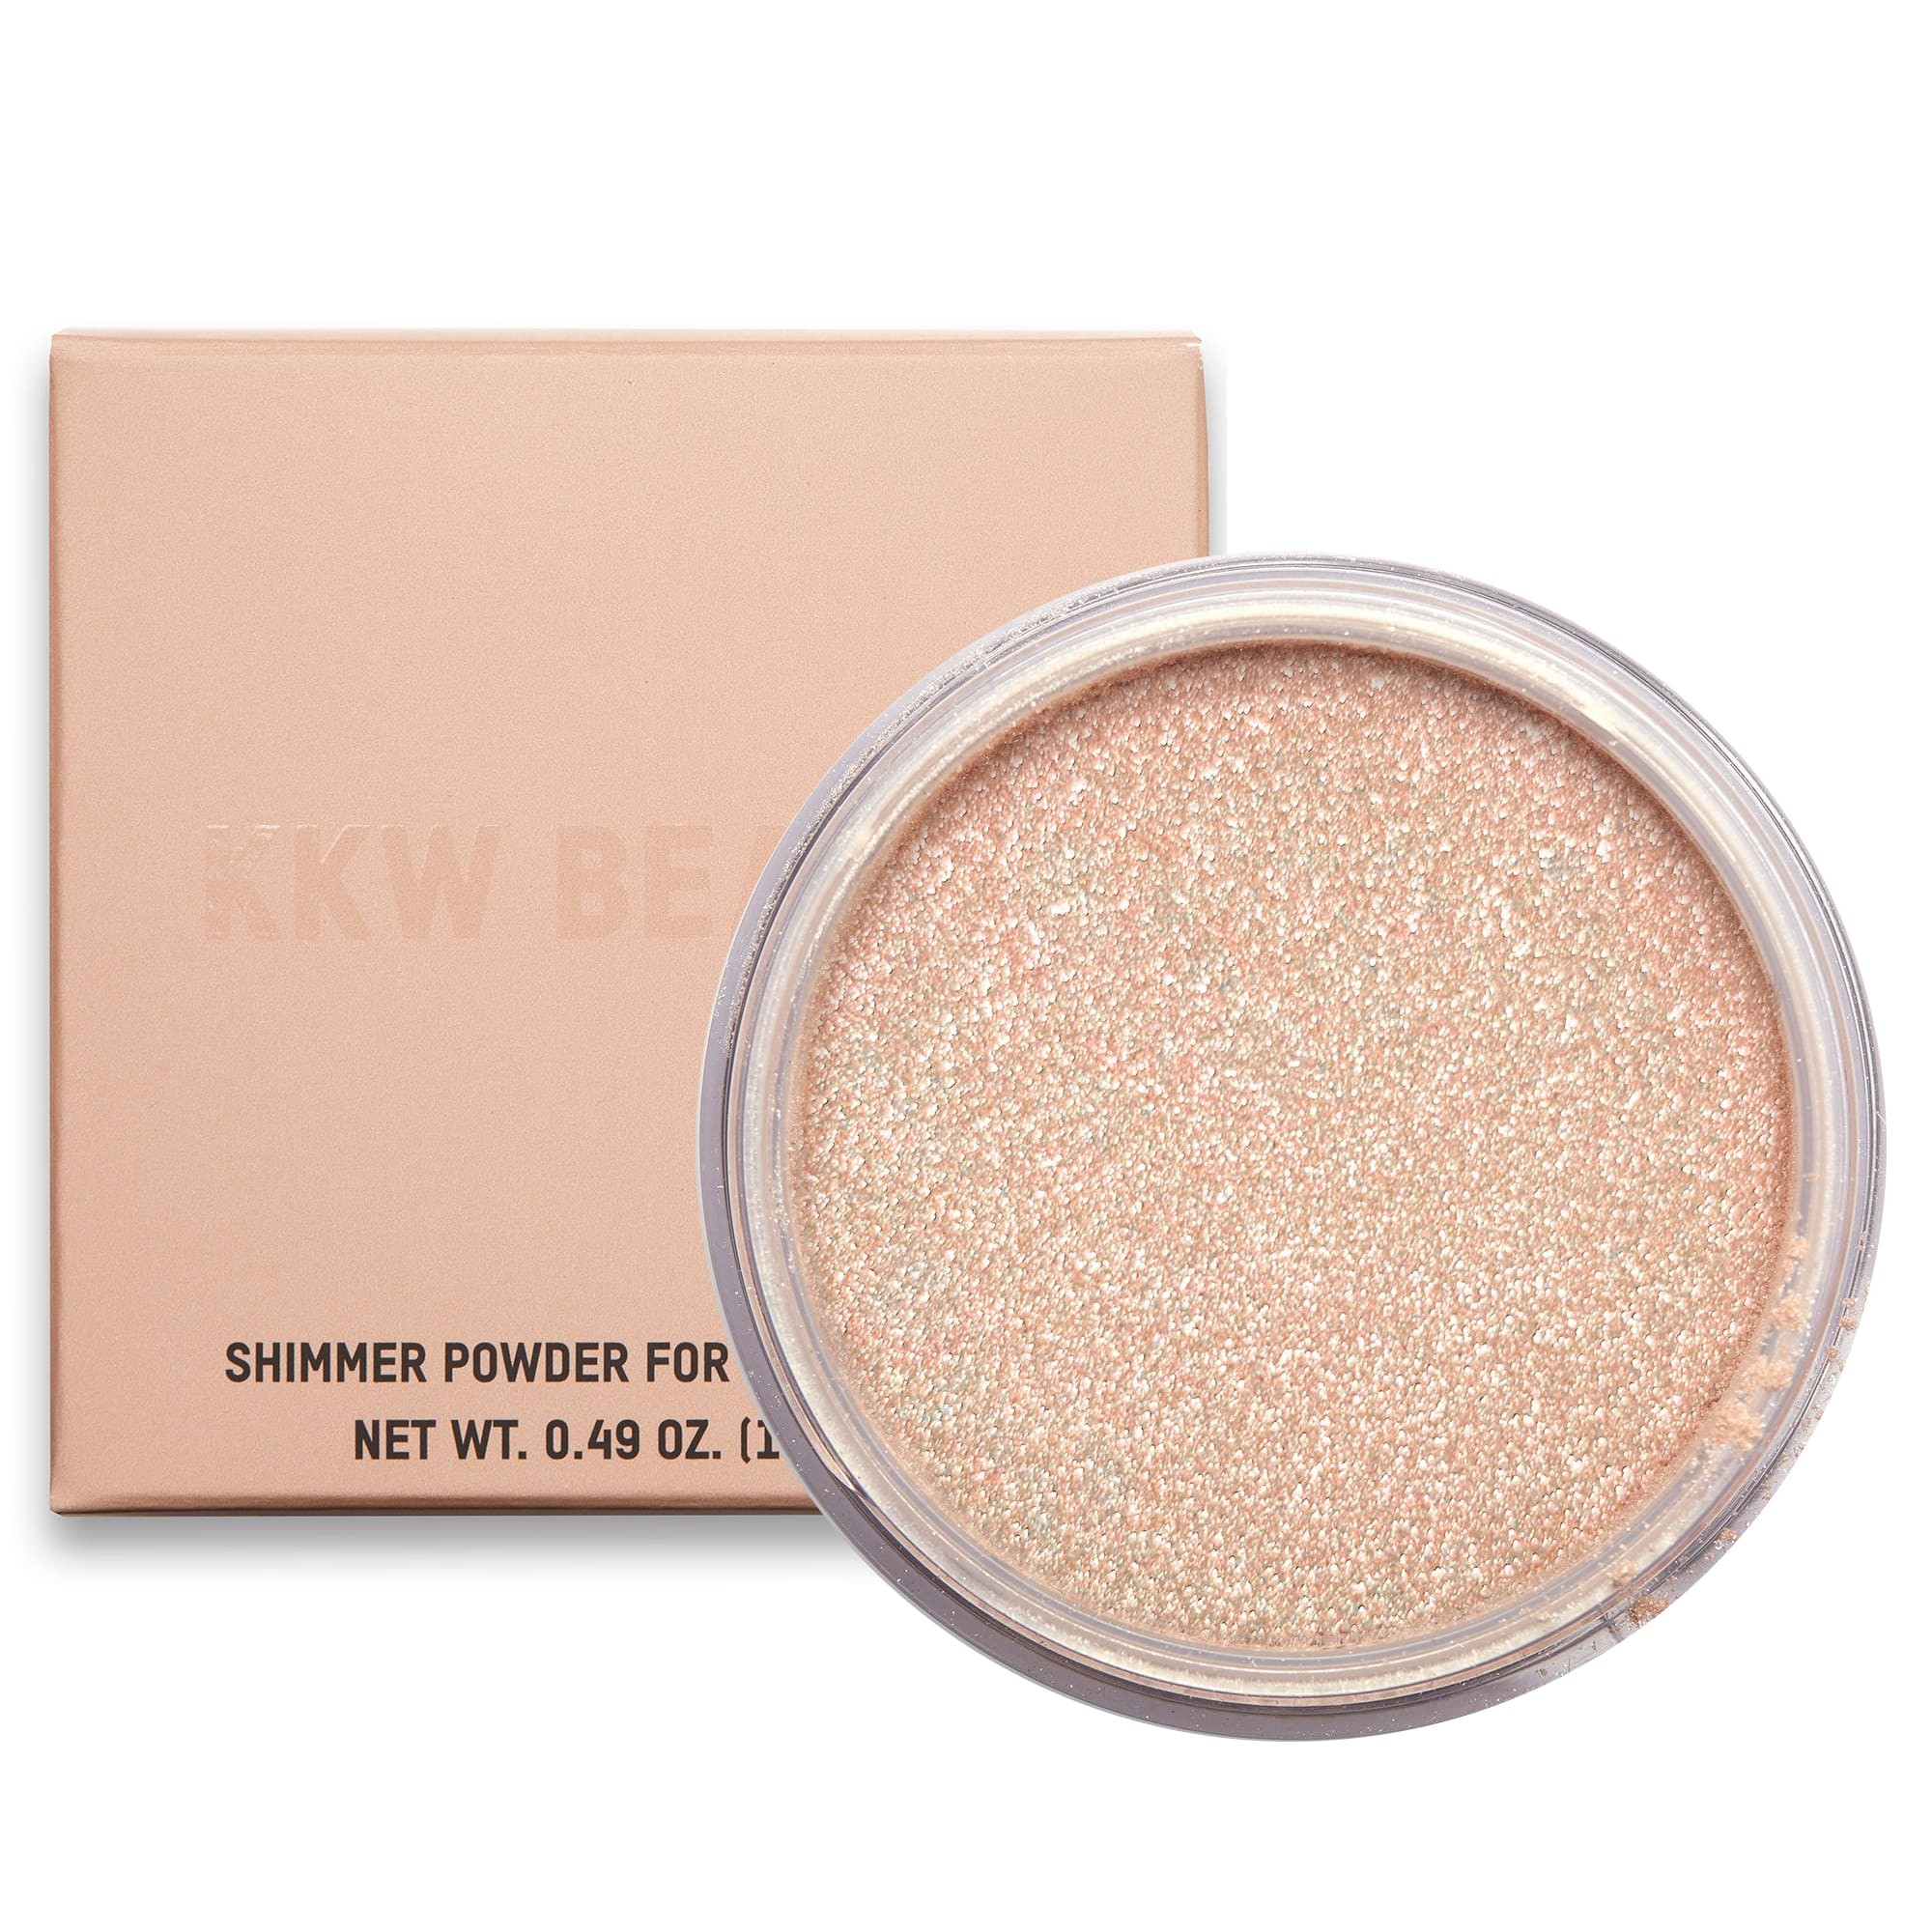 KKW Beauty Loose Shimmer Powder for Face & Body Review & Swatches